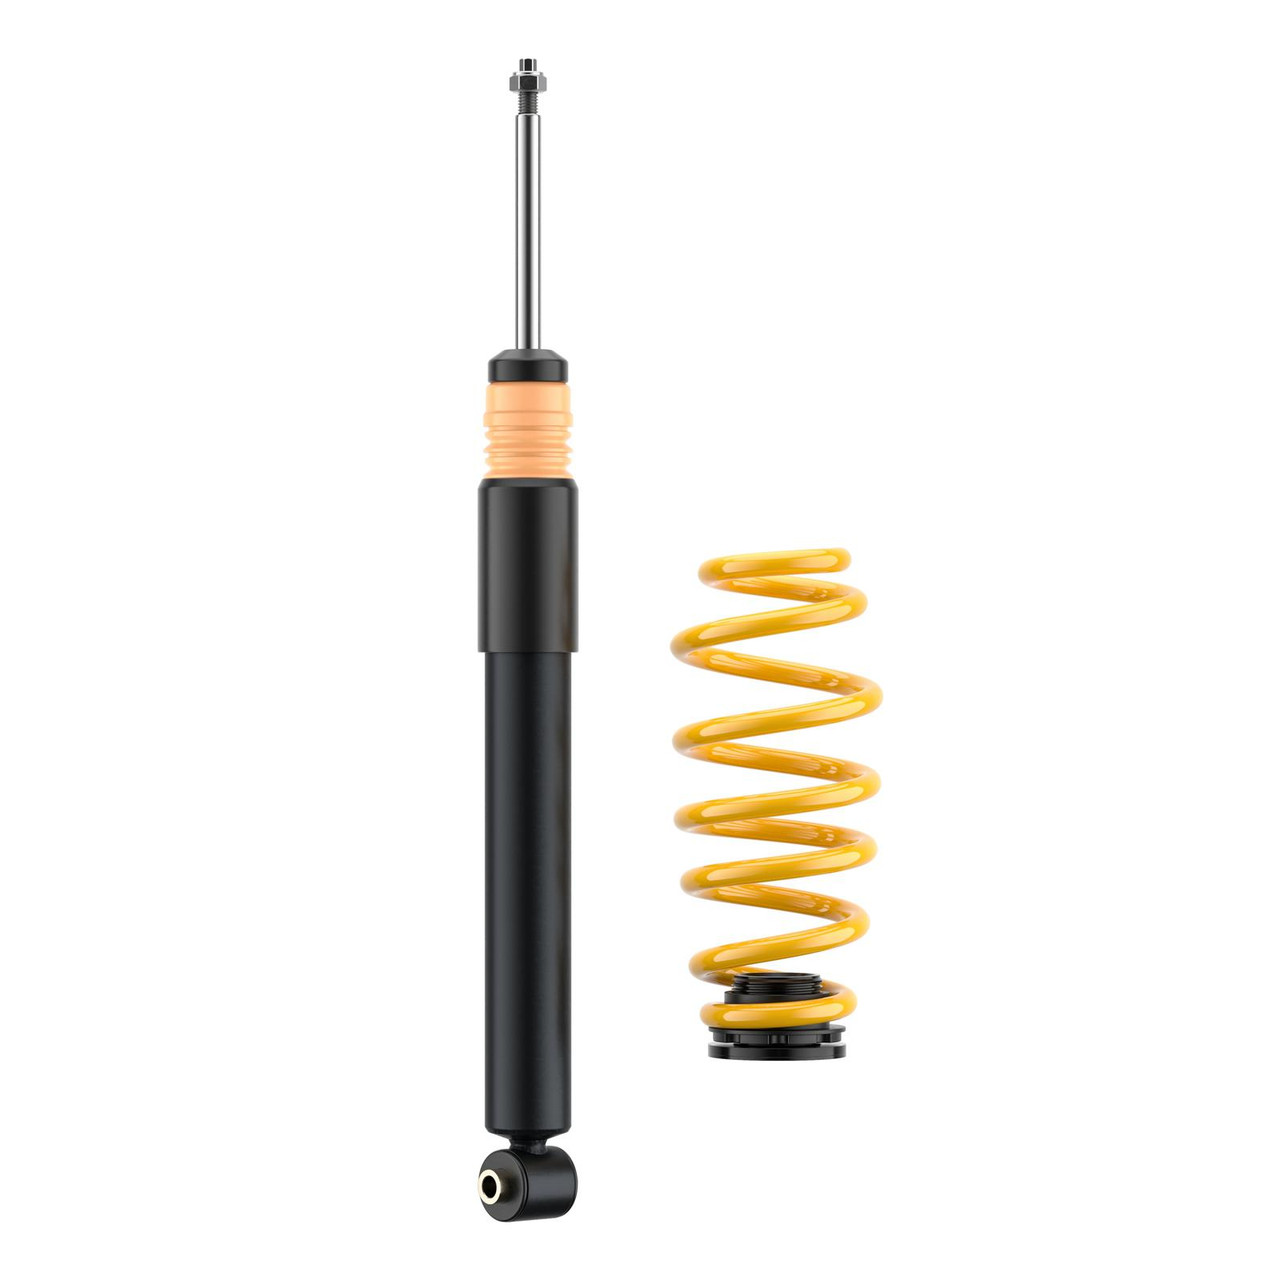 ST X Coilovers for VW Atlas FWD & 4Motion